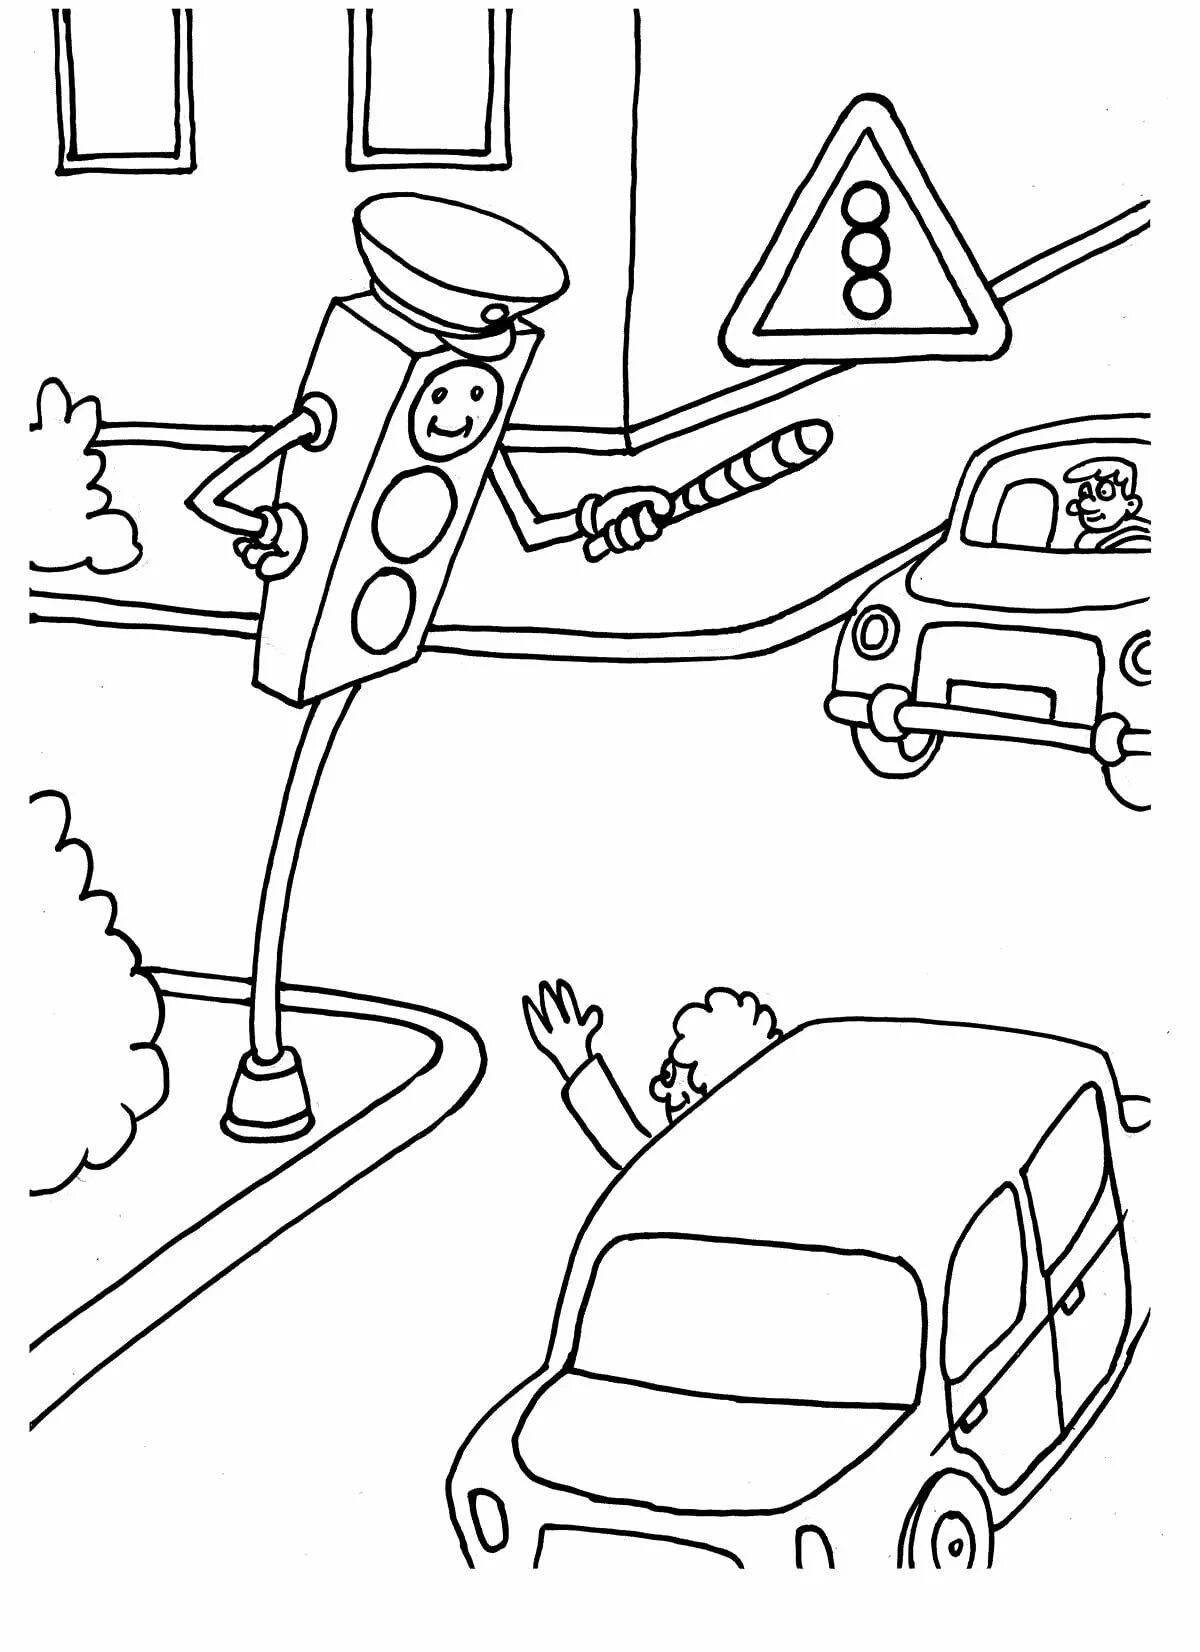 Comic road safety page